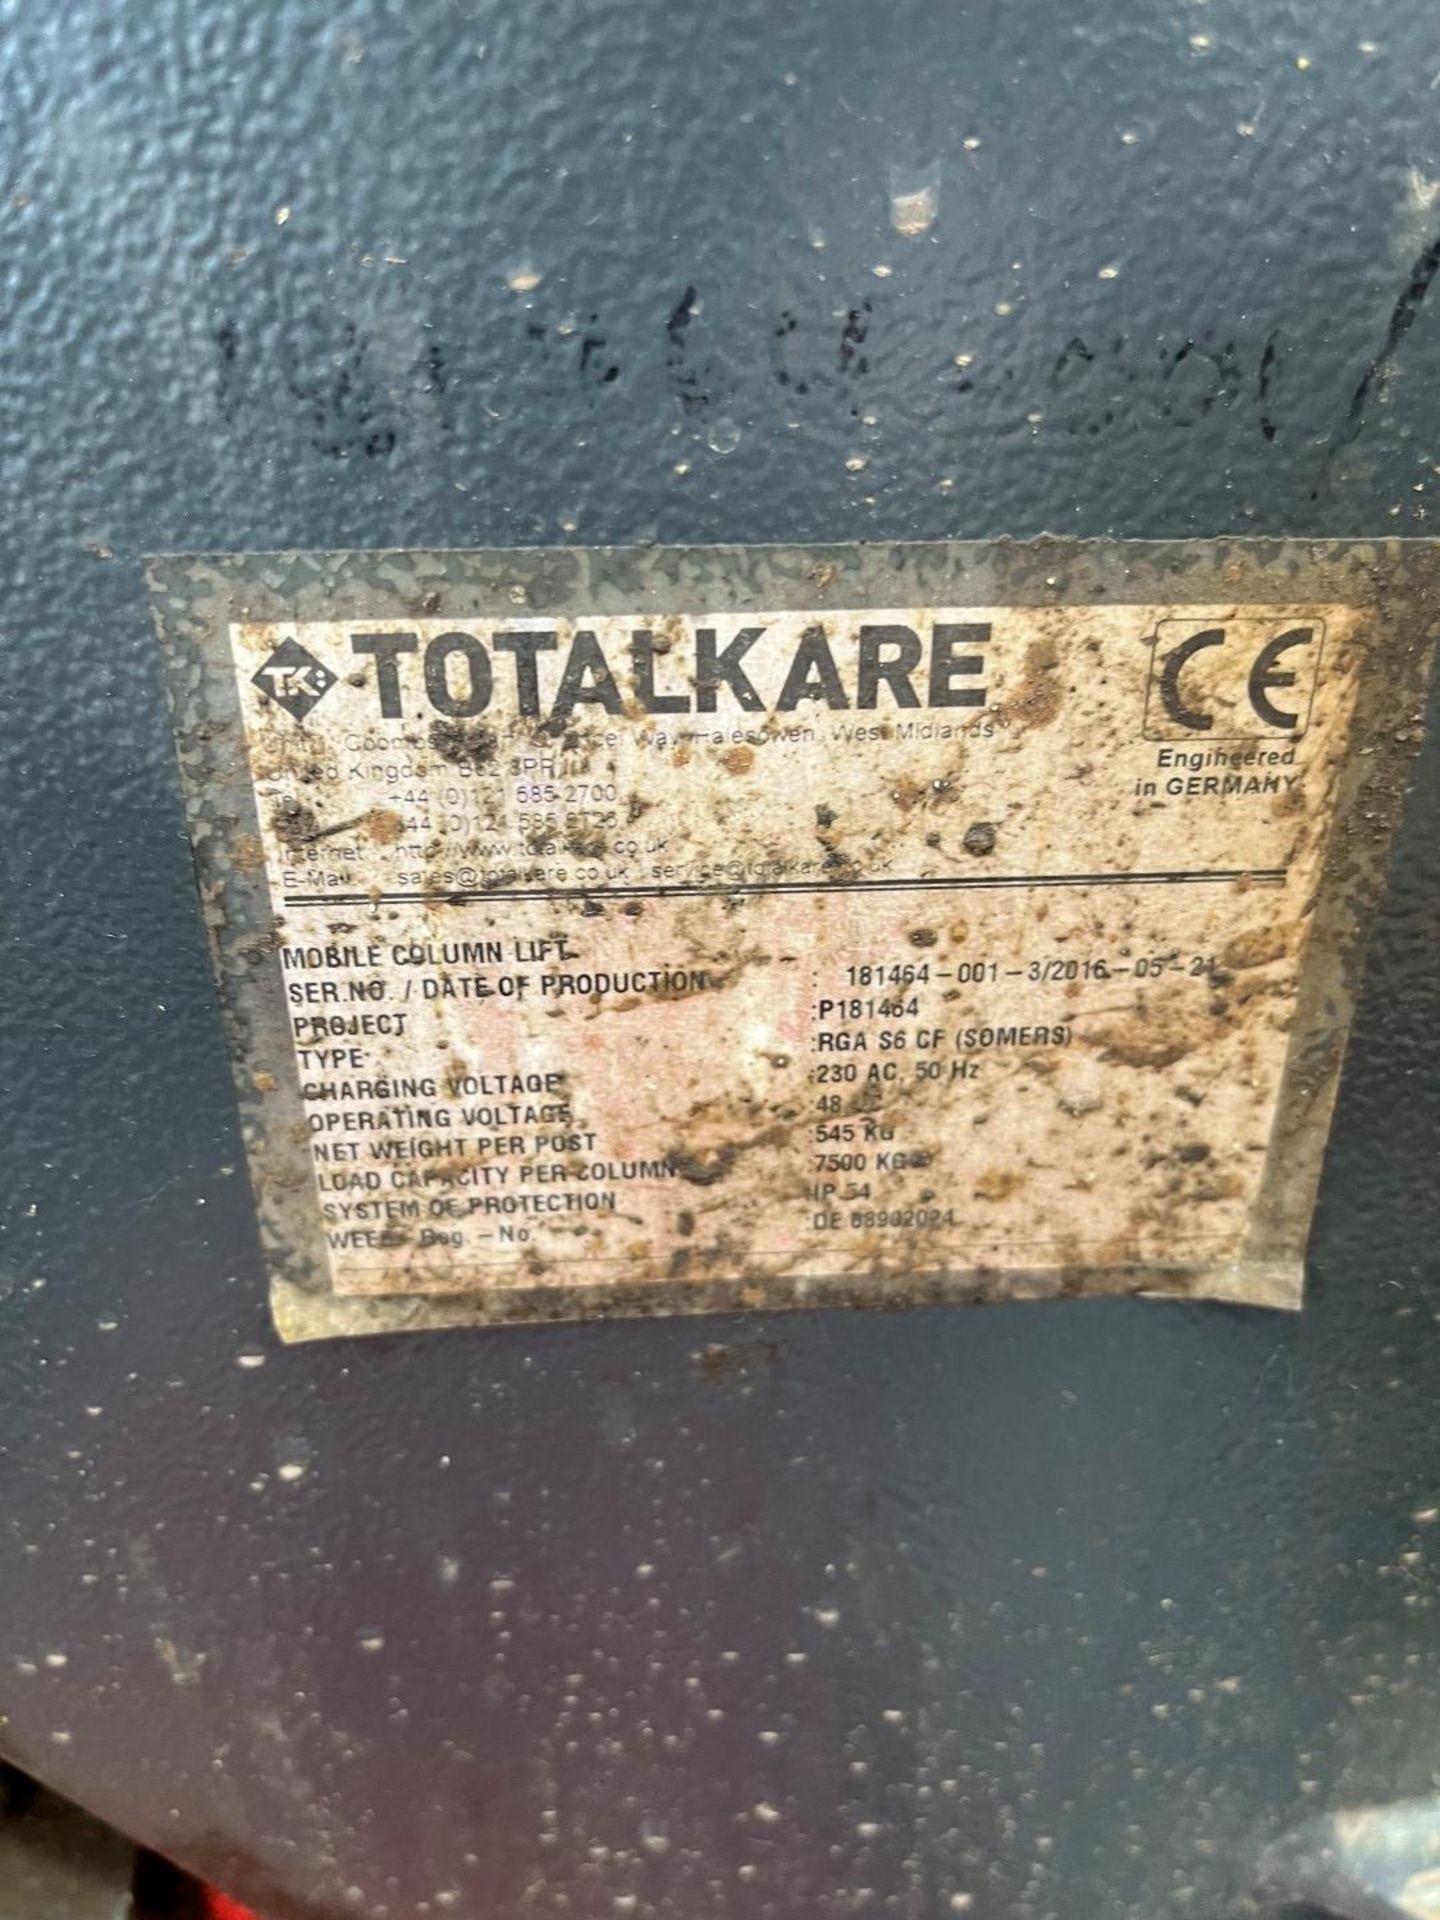 Set of 4 Totalkare Electric Column Lifts - Image 9 of 9